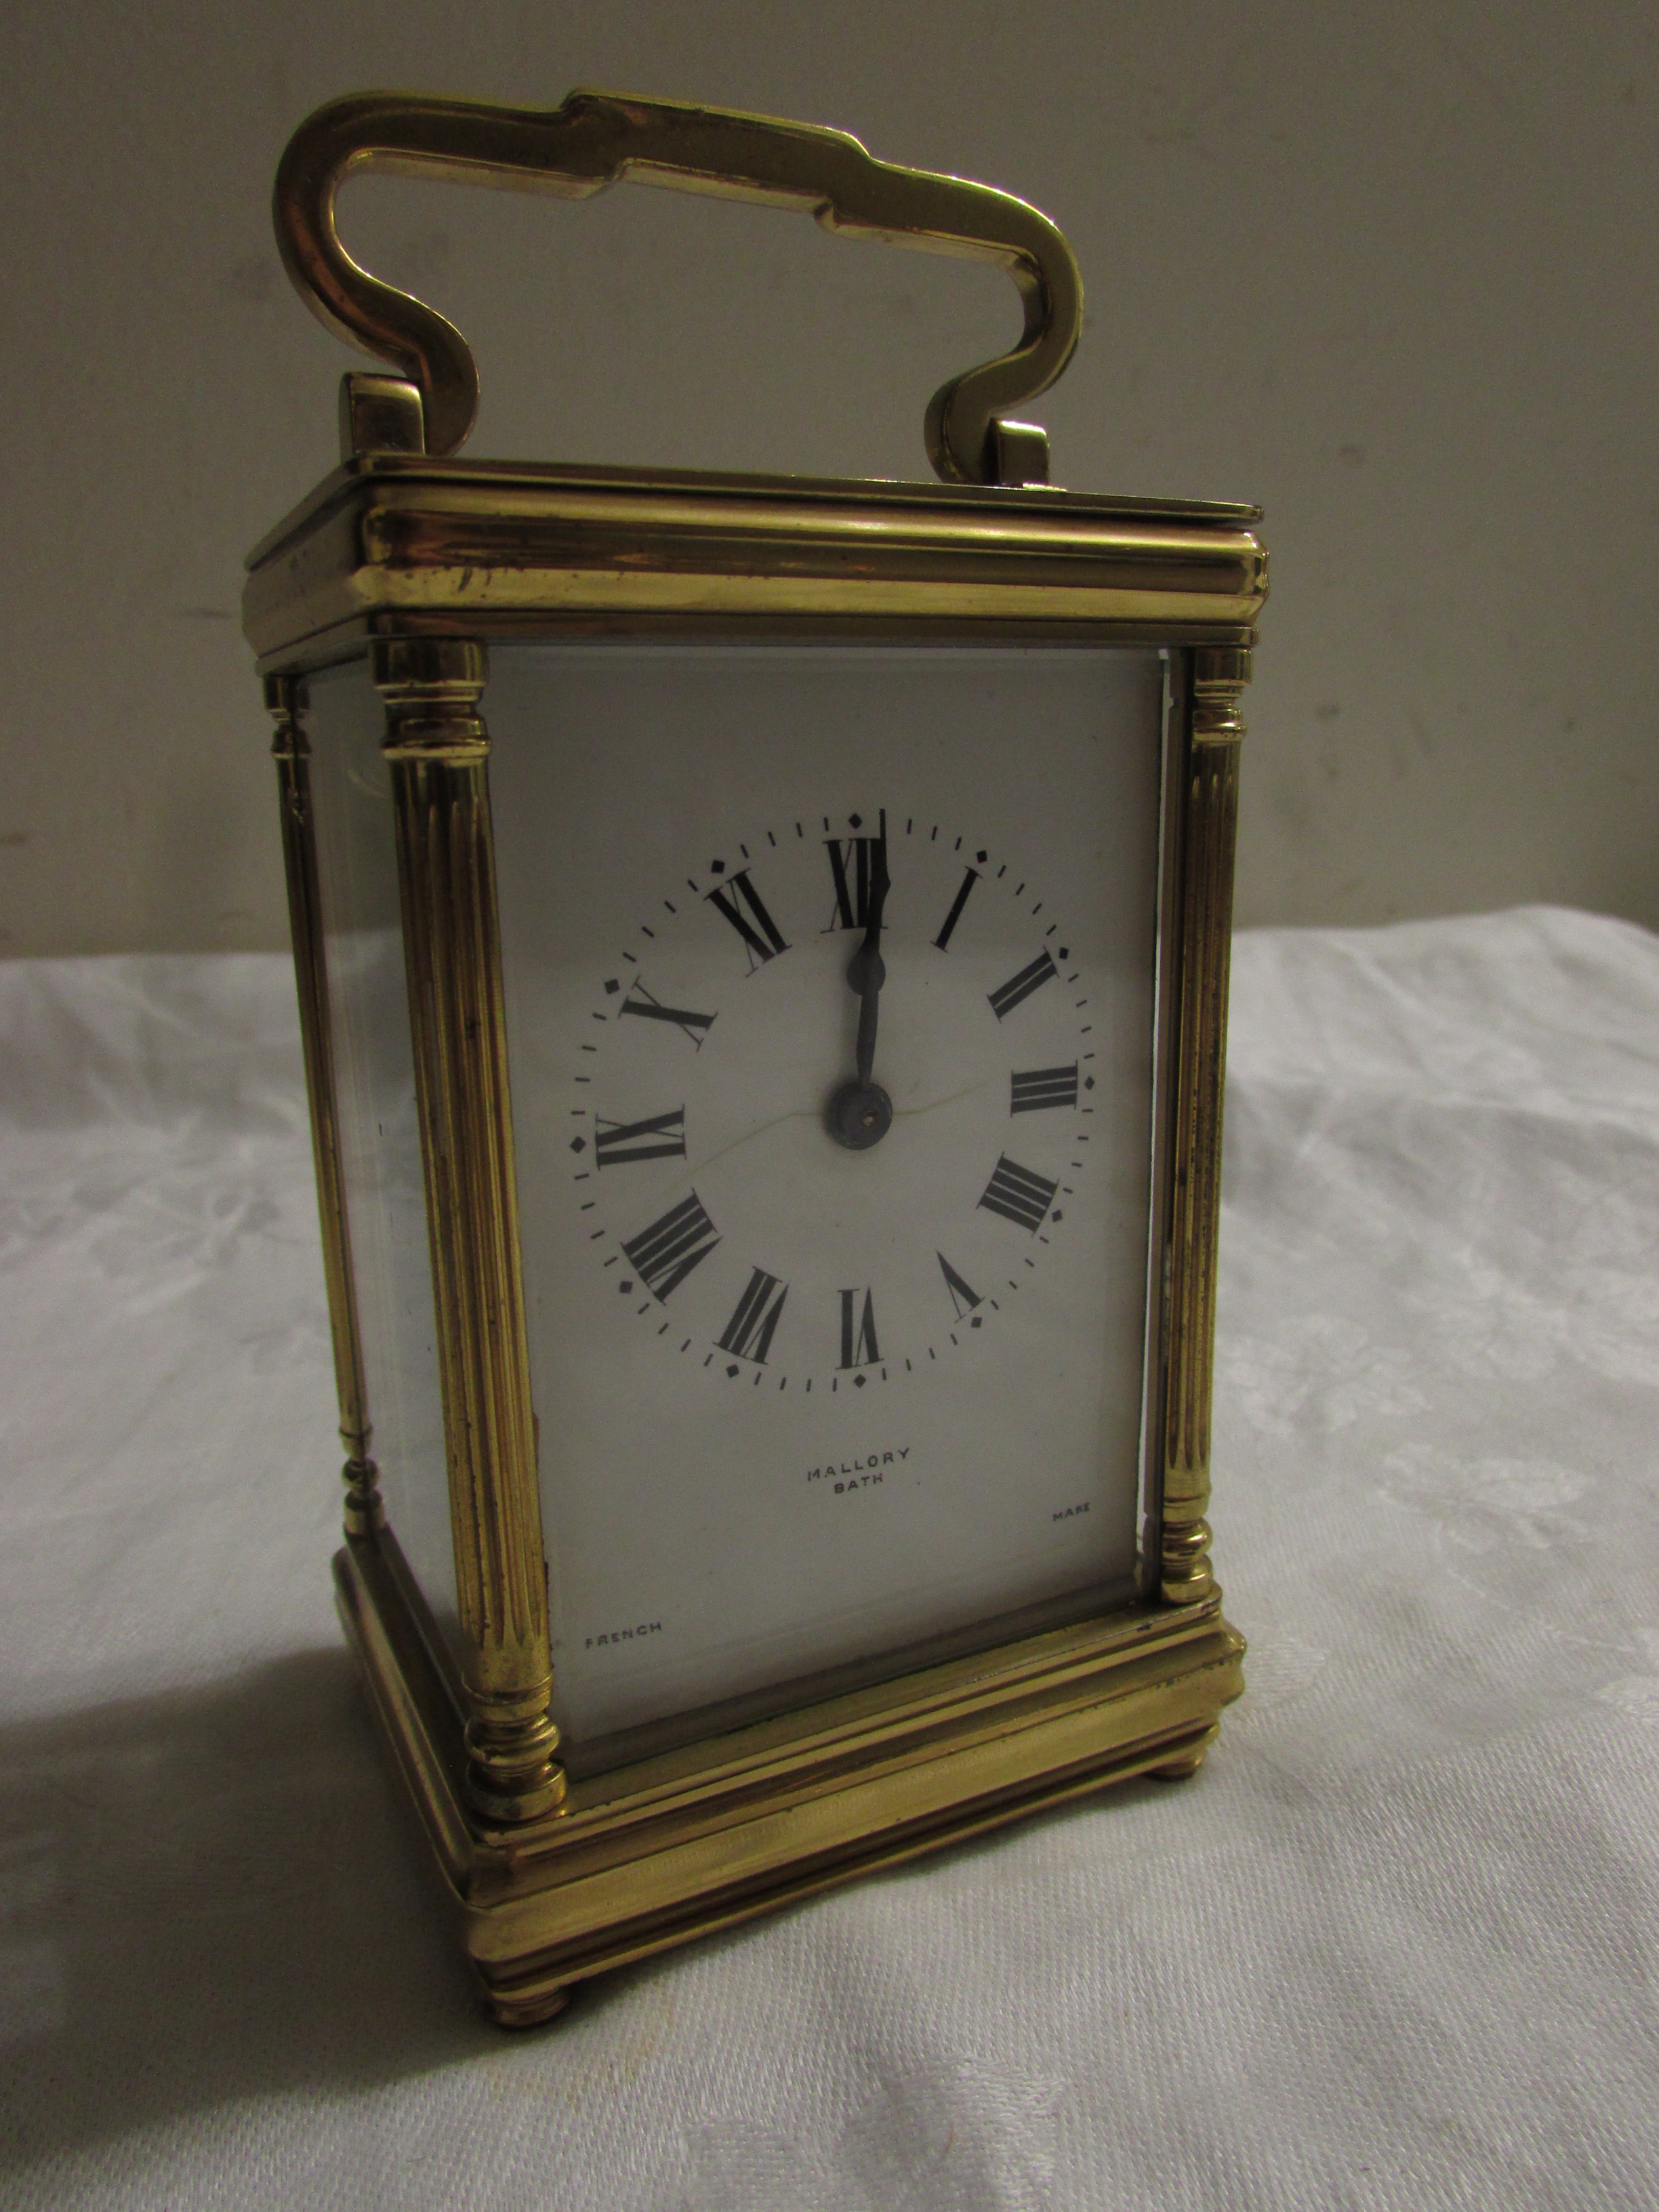 Brass carriage clock signed Mallory of Bath, French movement, (12cm x 7.5cm x 6cm) in original red